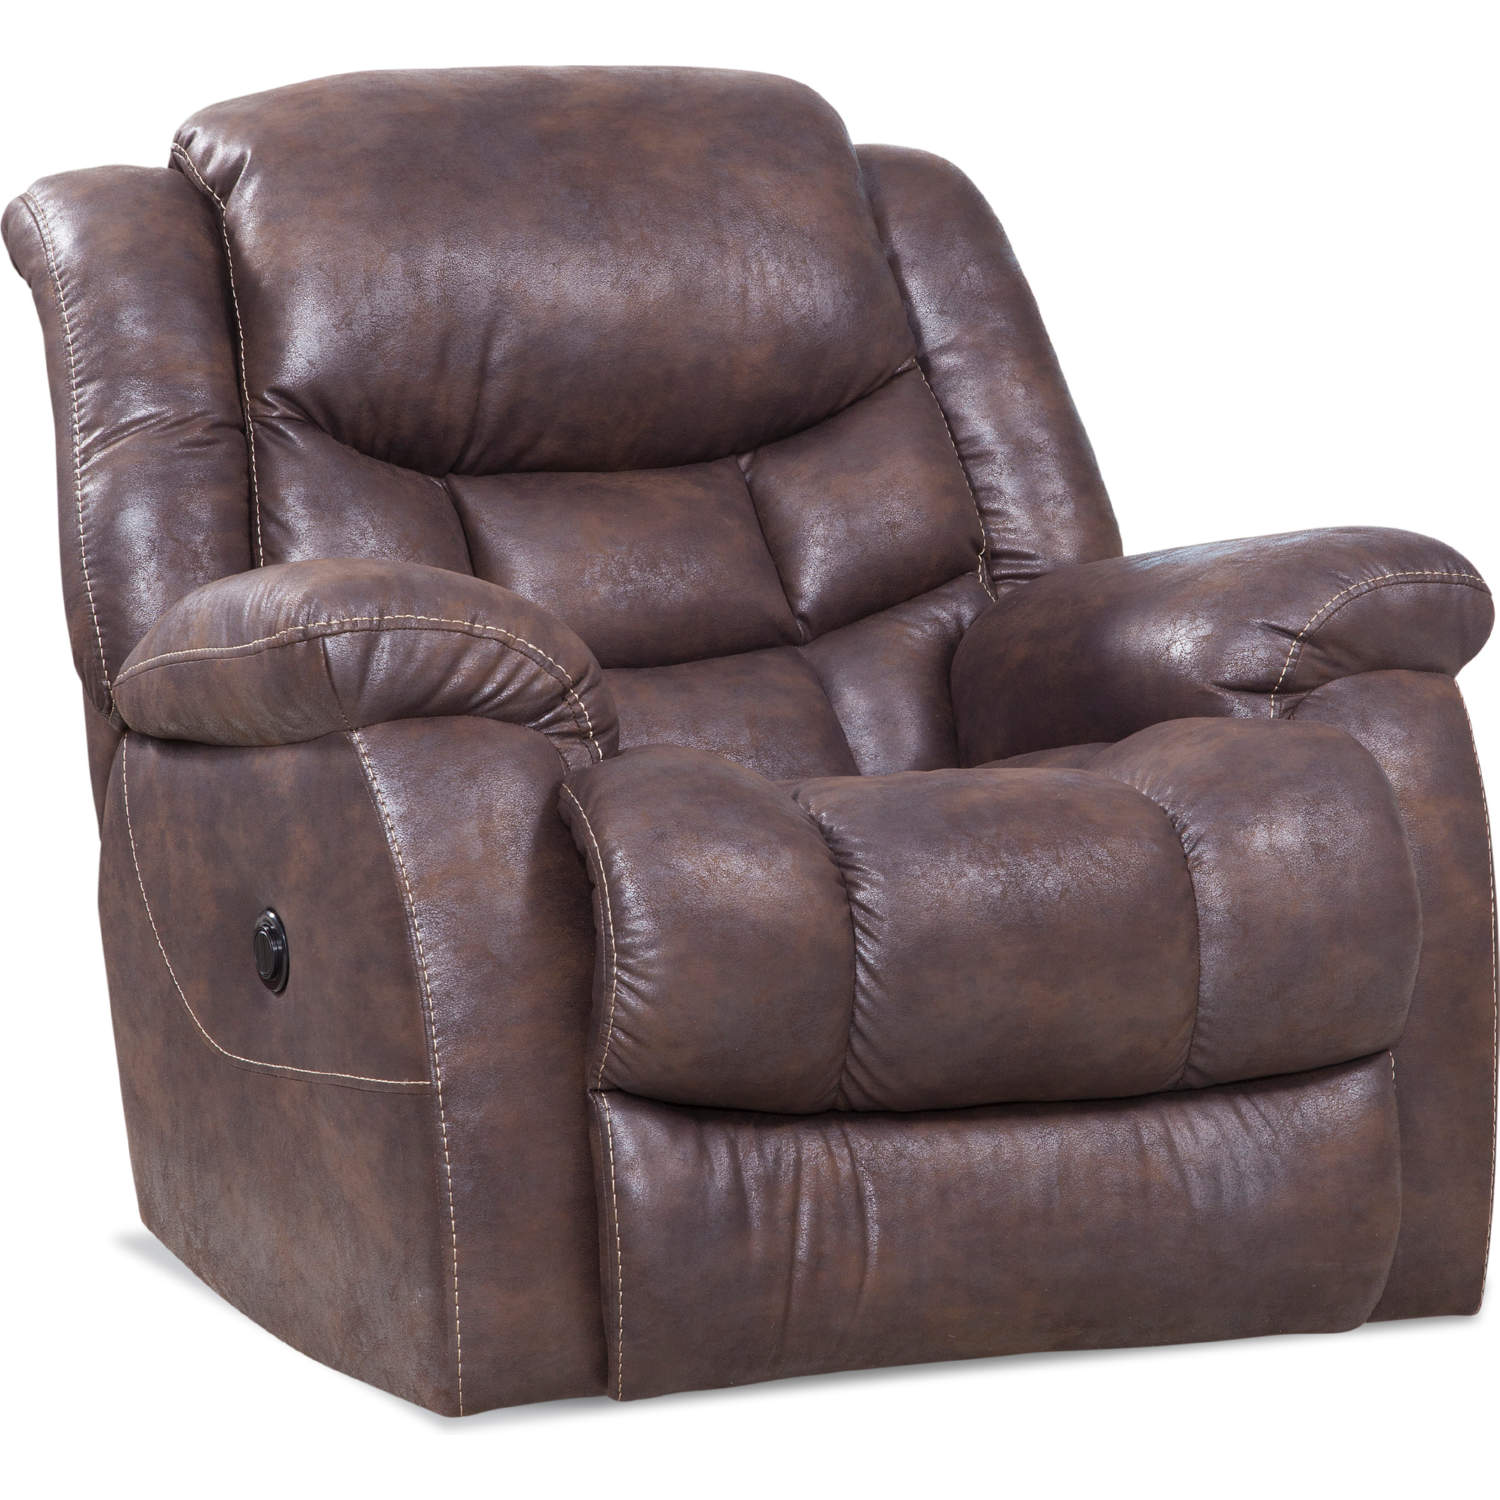 Southern Motion Contour 381-78P NL 167-16 Power Reclining Loveseat